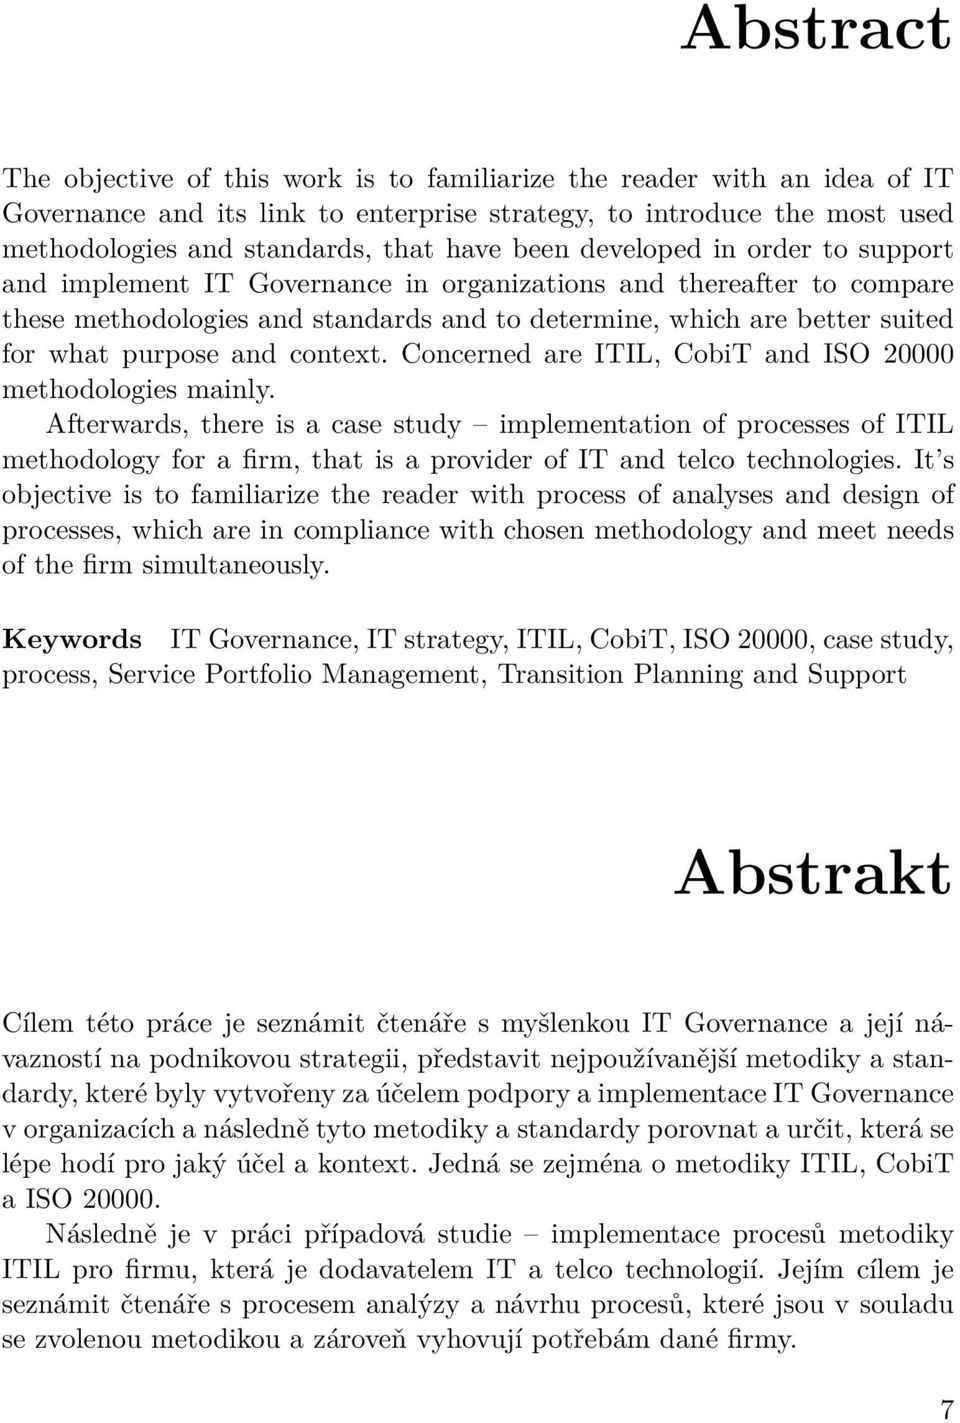 and context. Concerned are ITIL, CobiT and ISO 20000 methodologies mainly.